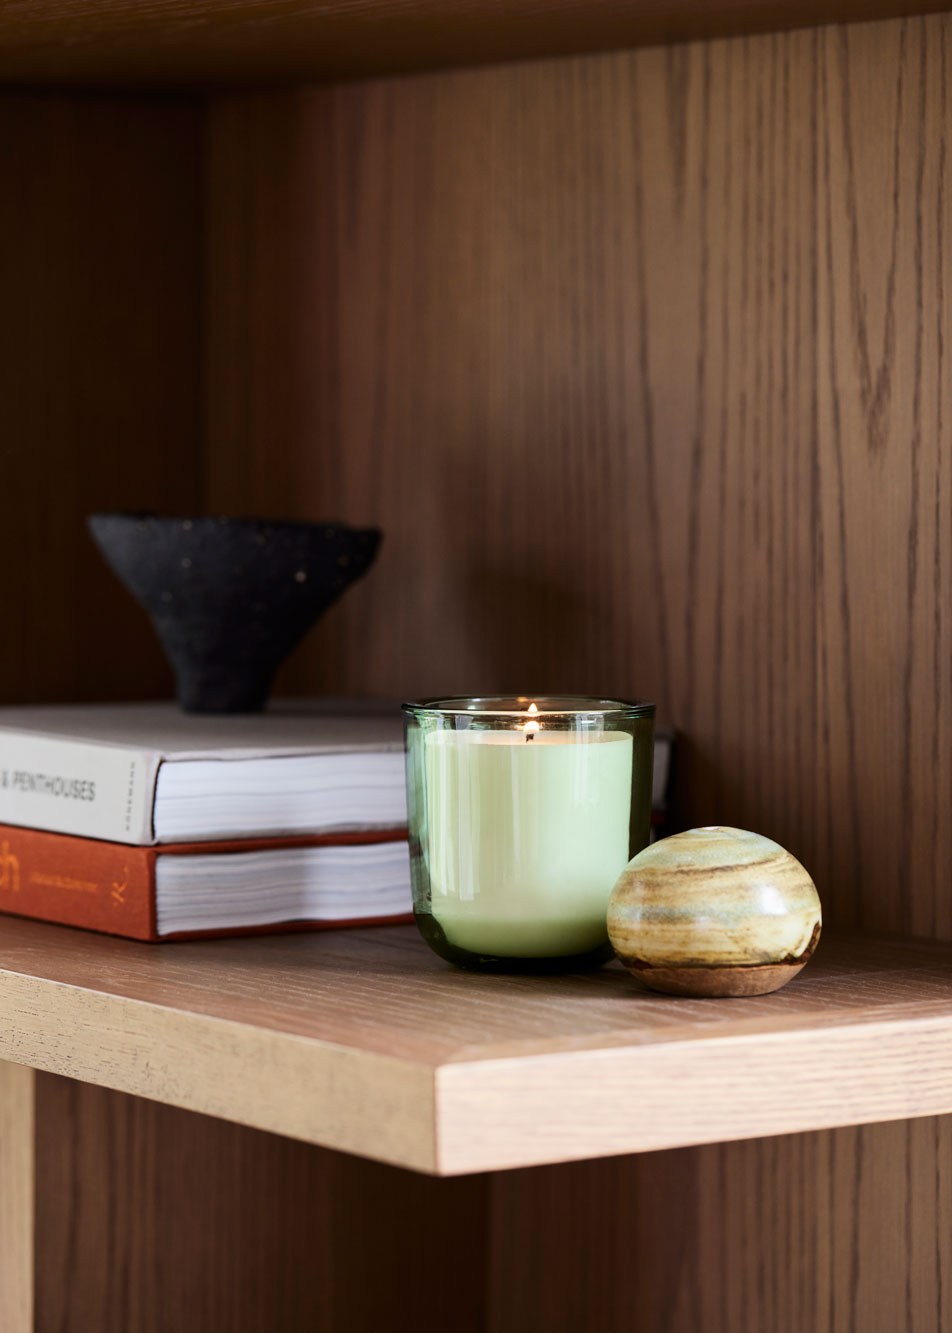 A lit candle sitting on a bookshelf. Next to it is a stack of books and a small ceramic decoration.